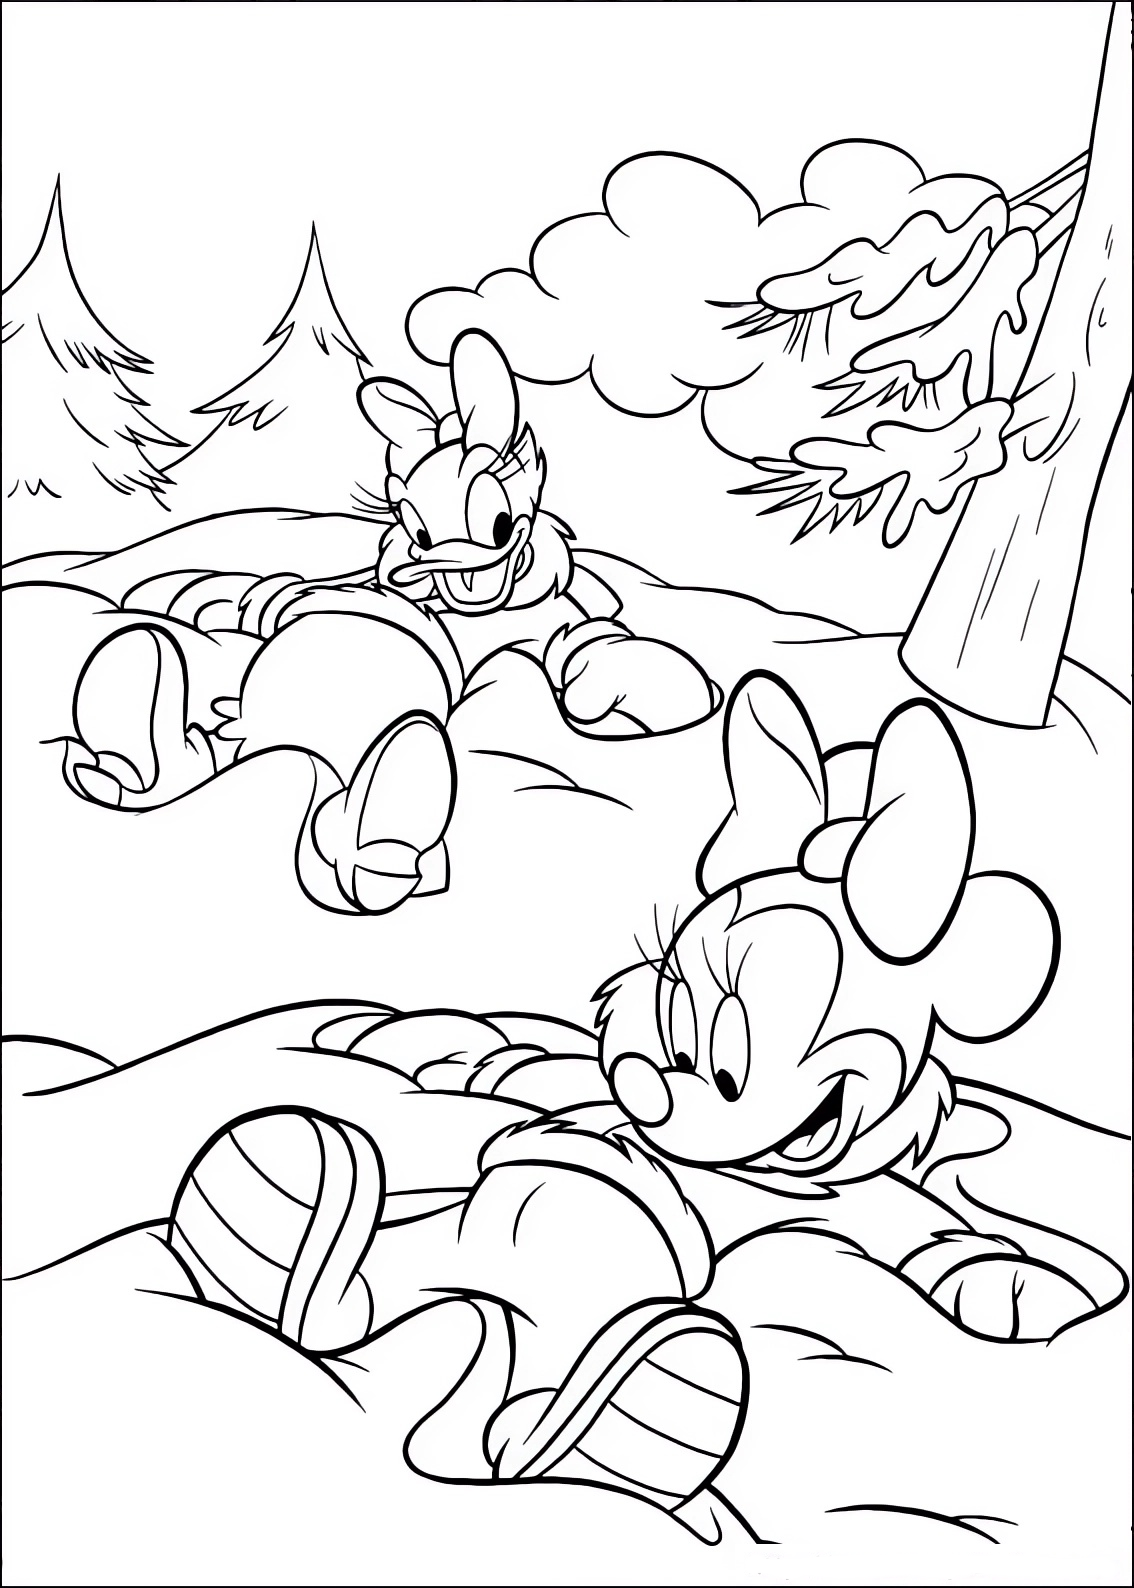 Coloring page of Minnie Mouse playing volleyball